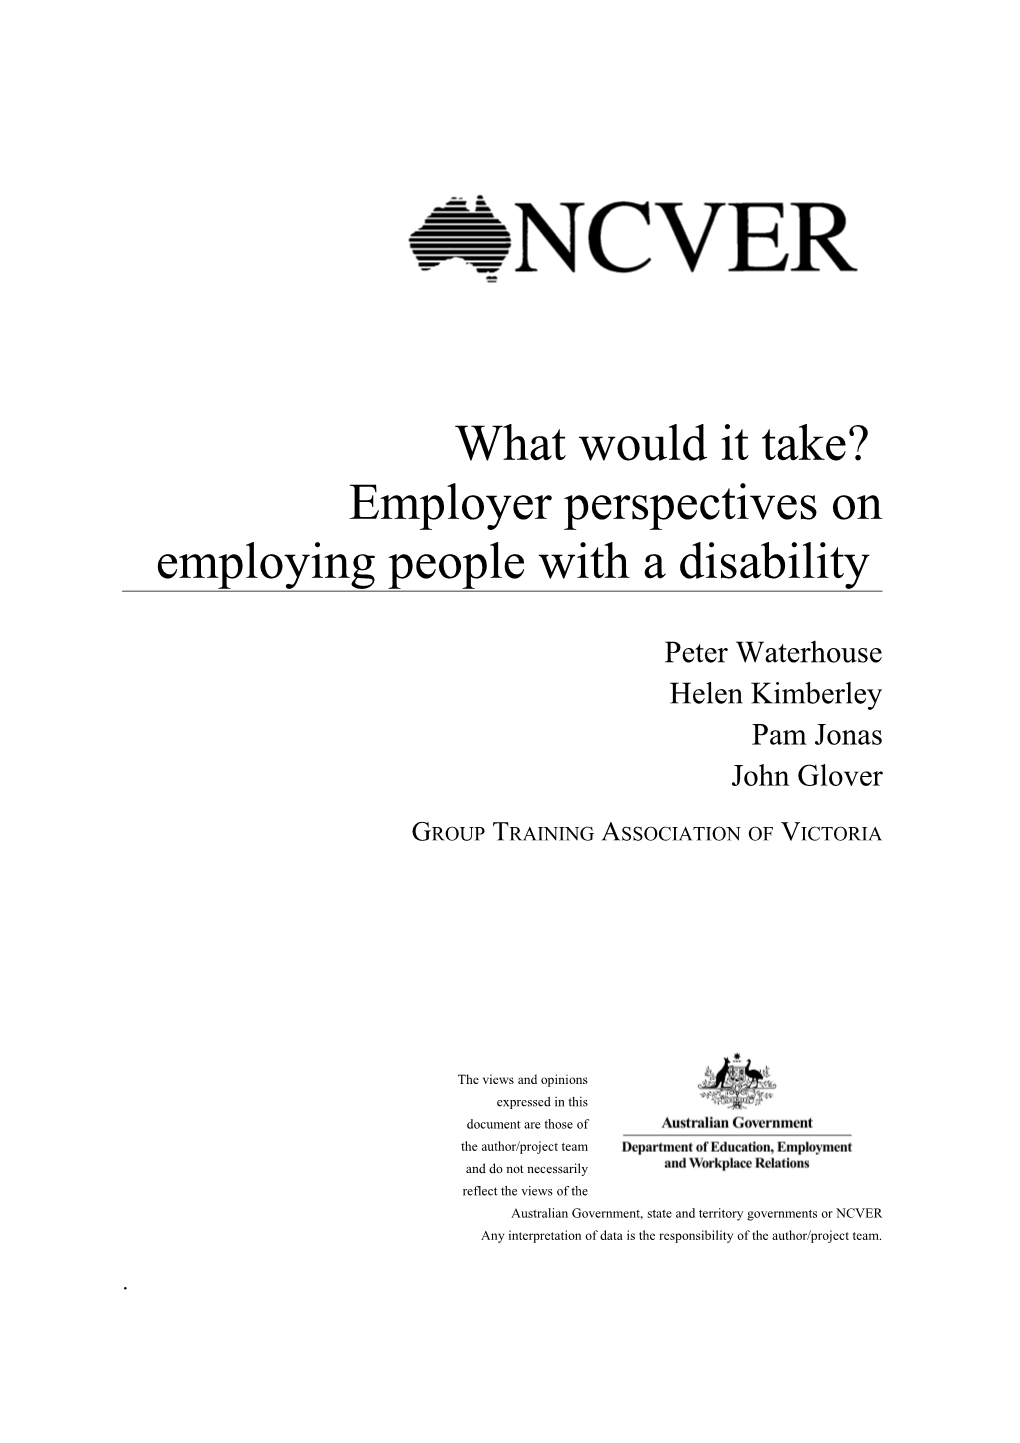 What Would It Take? Employer Perspectives on Employing People with a Disability